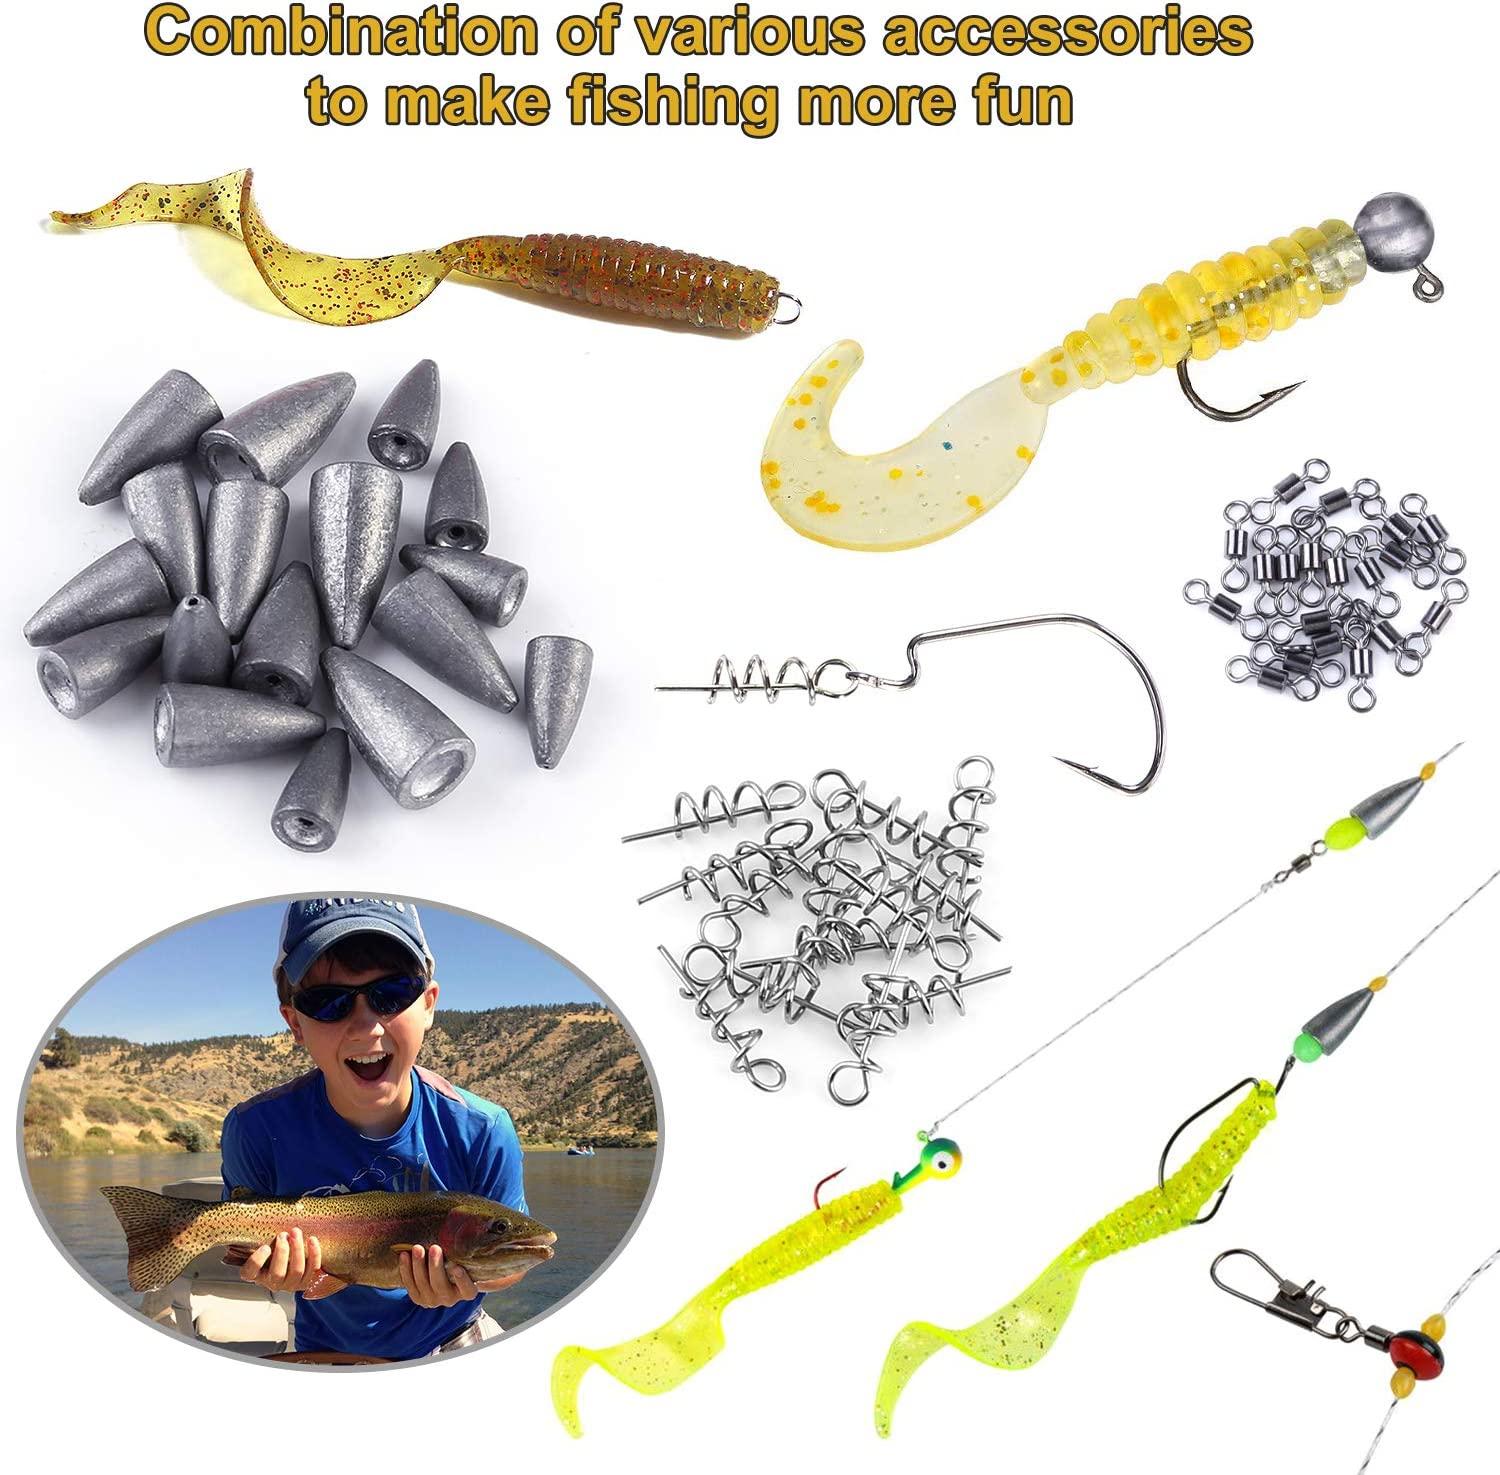 PLUSINNO Fishing Lures Baits Tackle Including Crankbaits, Spinnerbaits, Plastic  Worms, Jigs, Topwater Lures, Tackl…